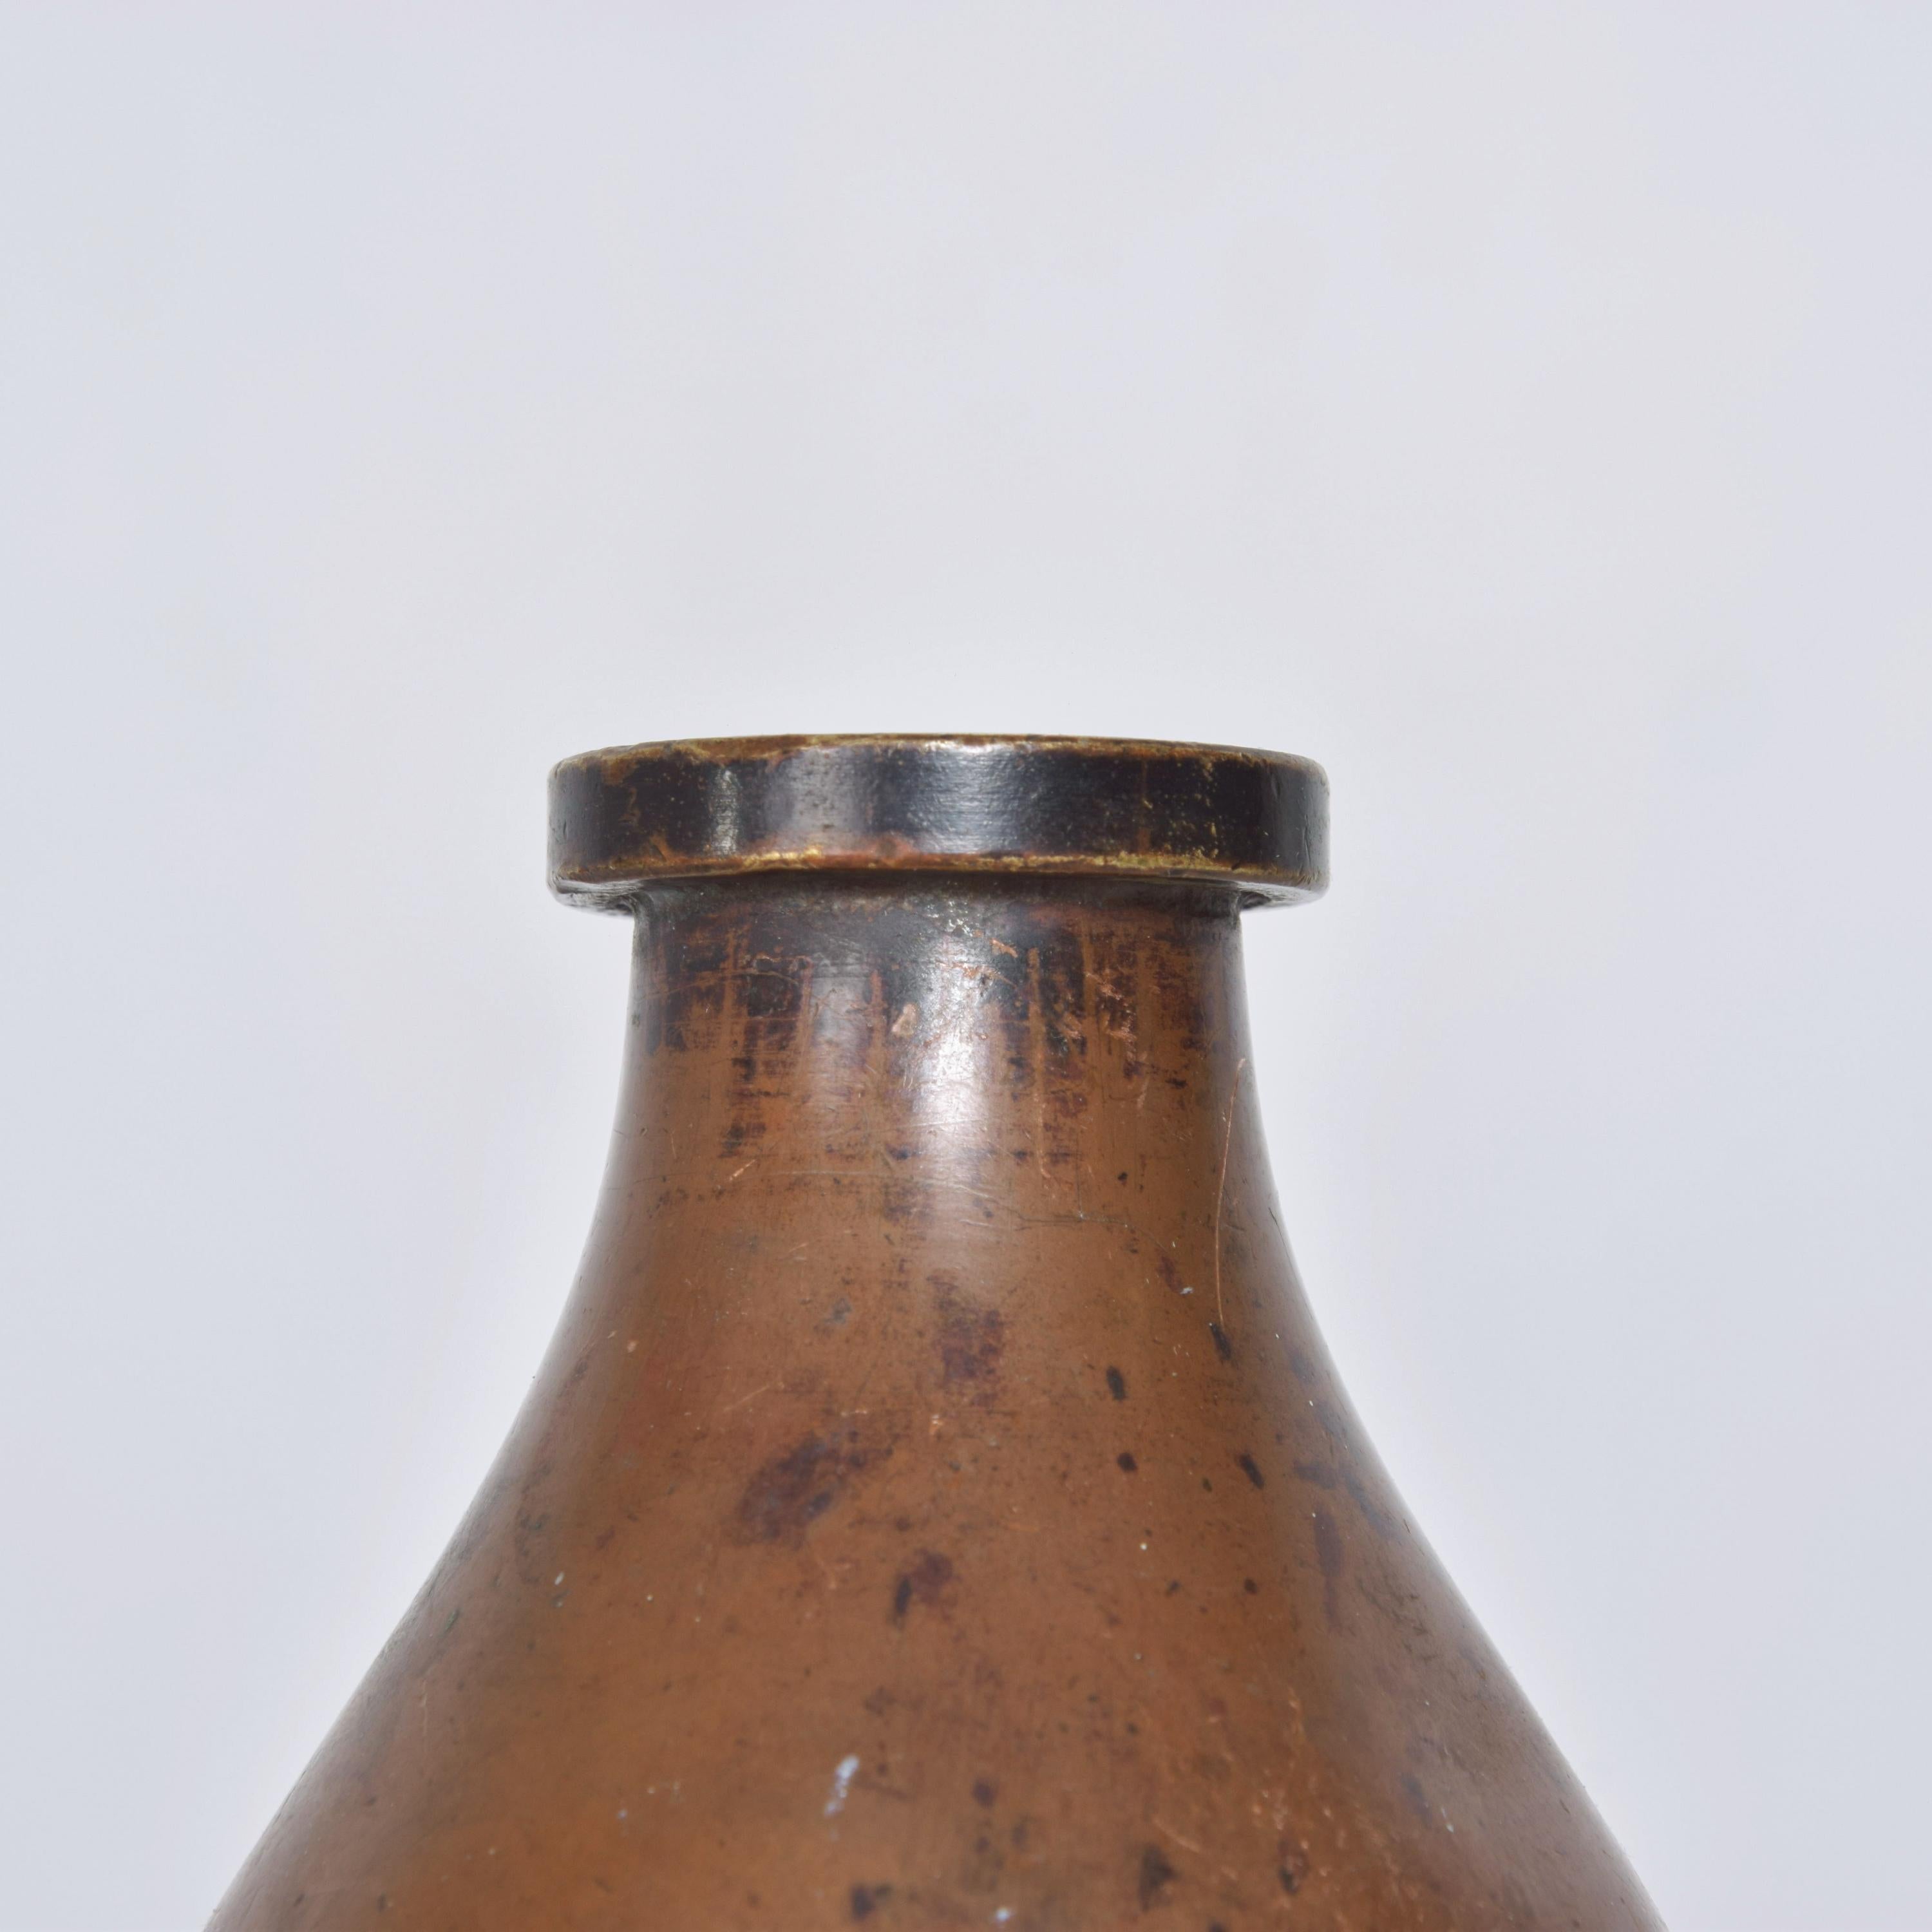 1940s Vintage Industrial Aged Bottle Vase Jug in Patinated Copper USA In Fair Condition For Sale In Chula Vista, CA